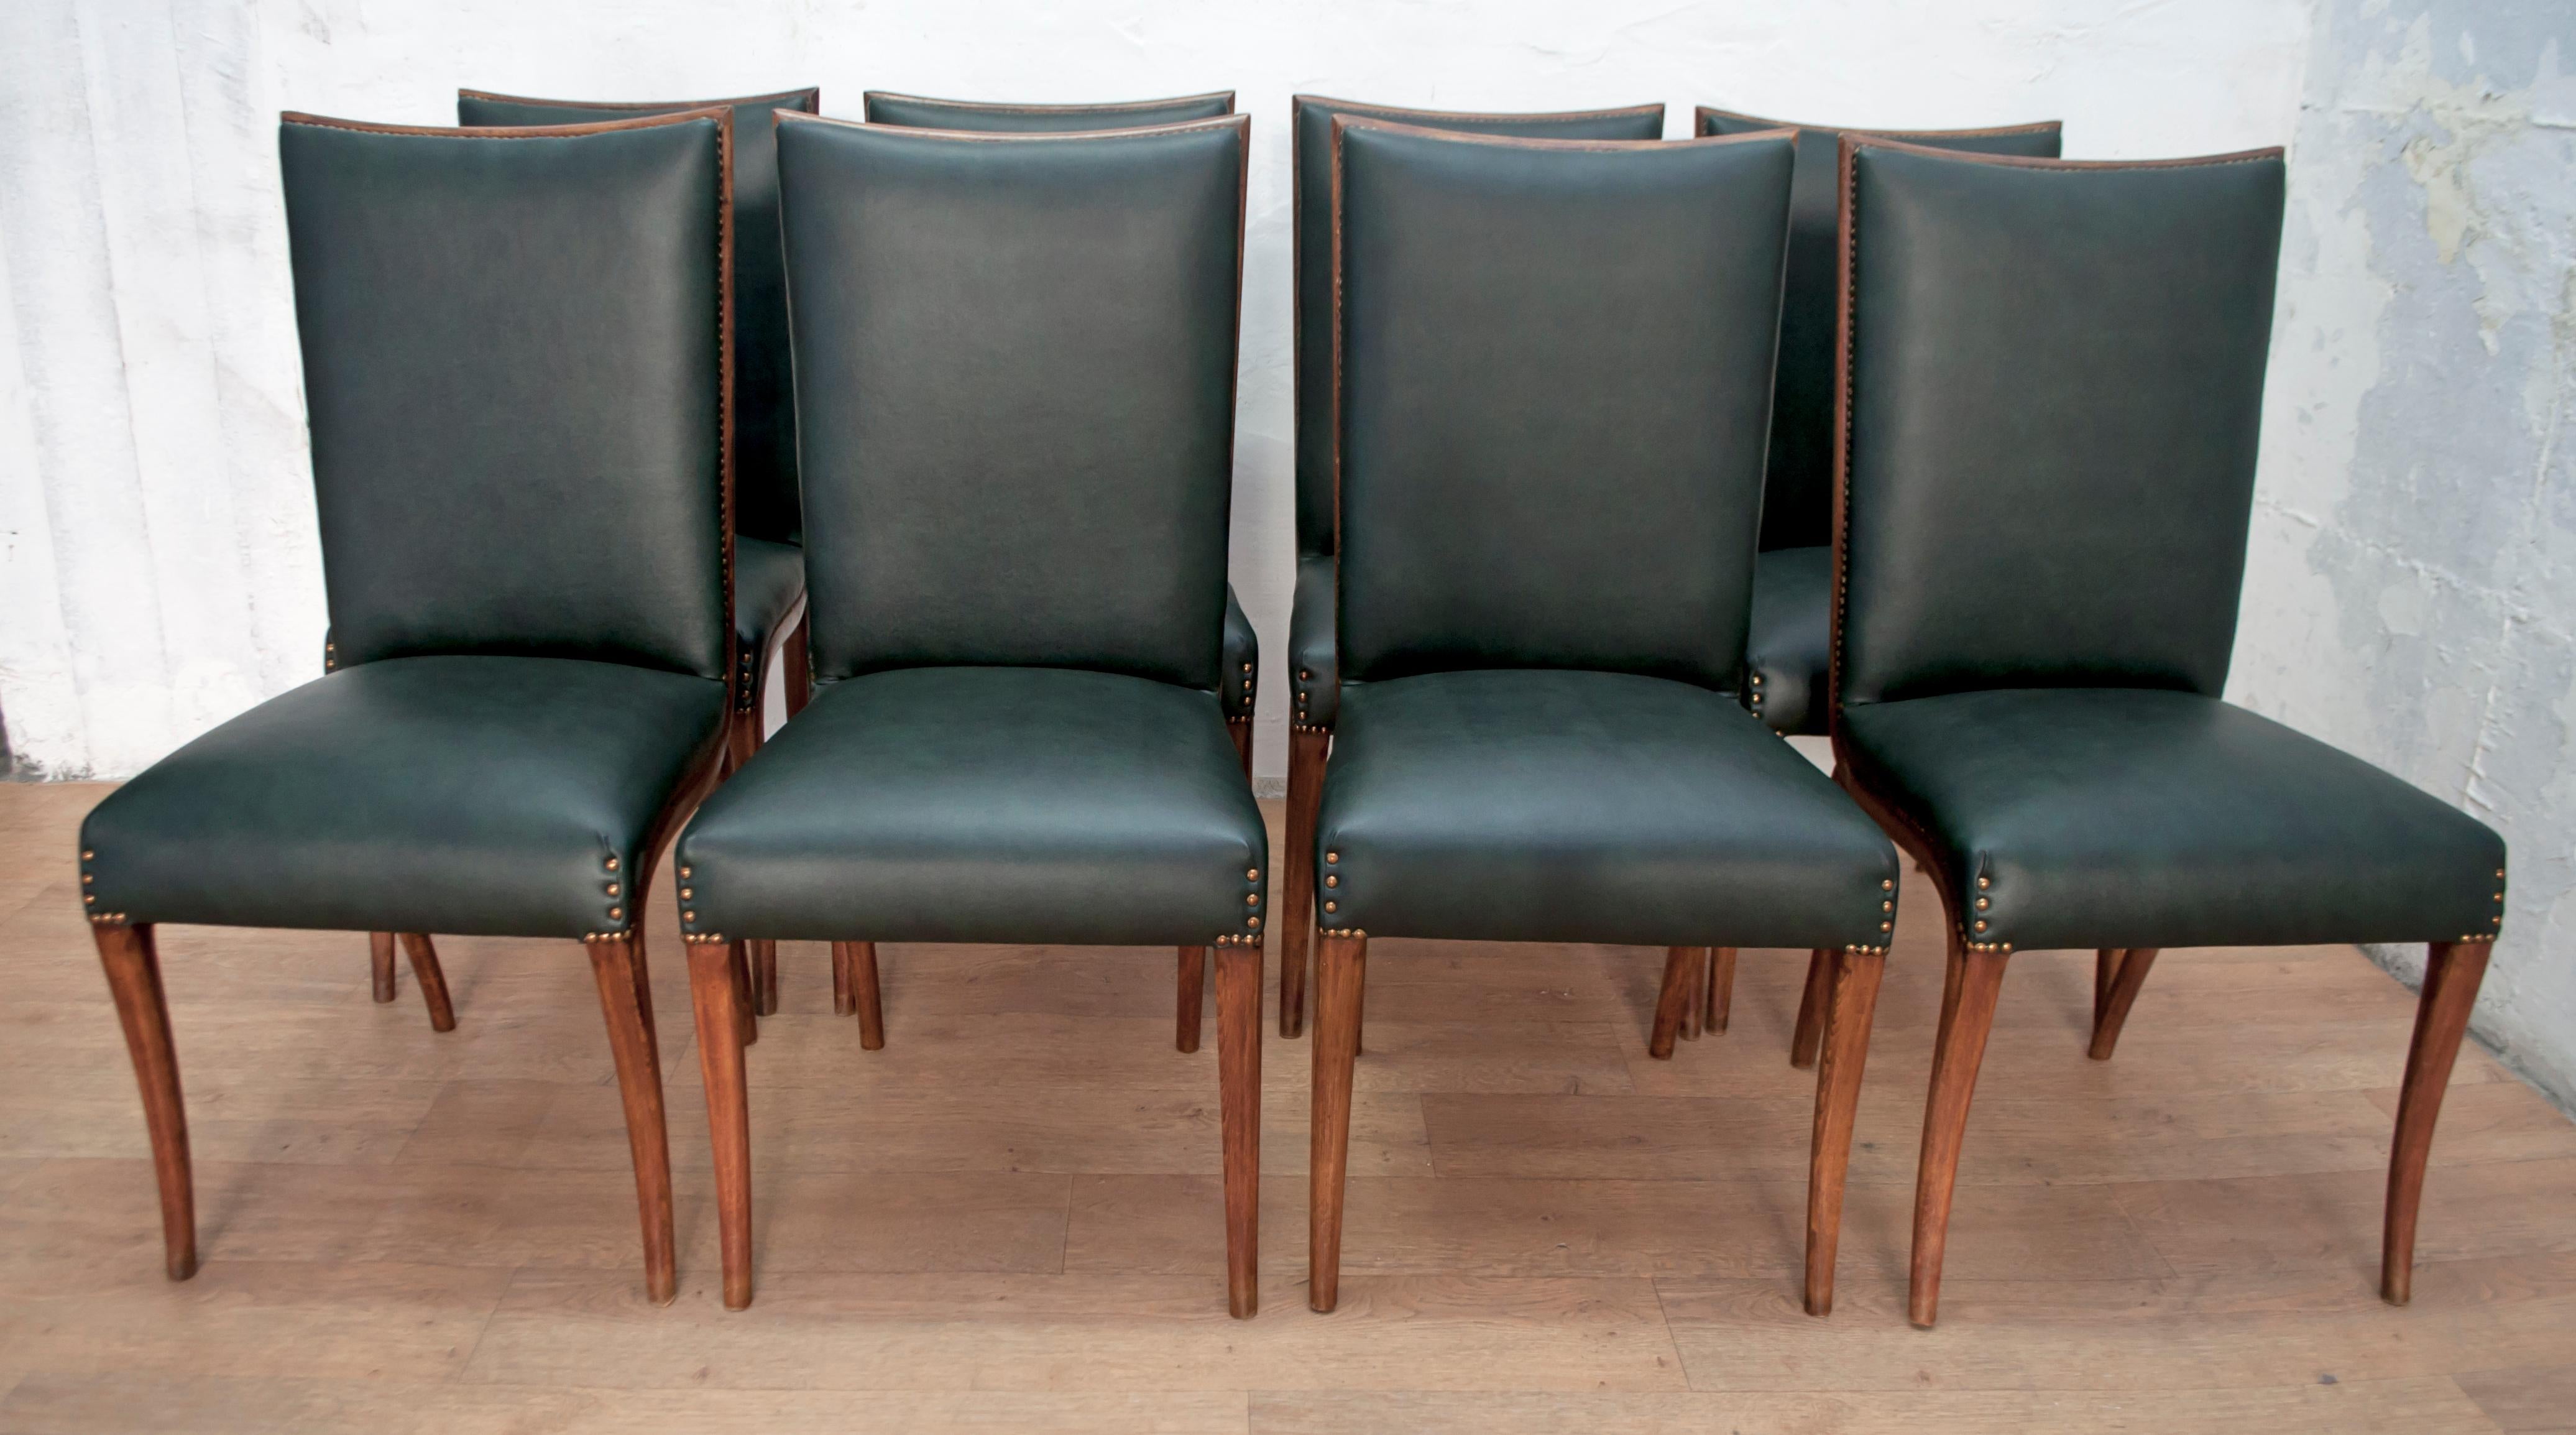 These eight dining chairs were designed by the famous Italian design Vittorio Dassi, Italia, 1950.
The chairs have been partially restored, the upholstery has been redone in green eco-leather, as it was originally.
 